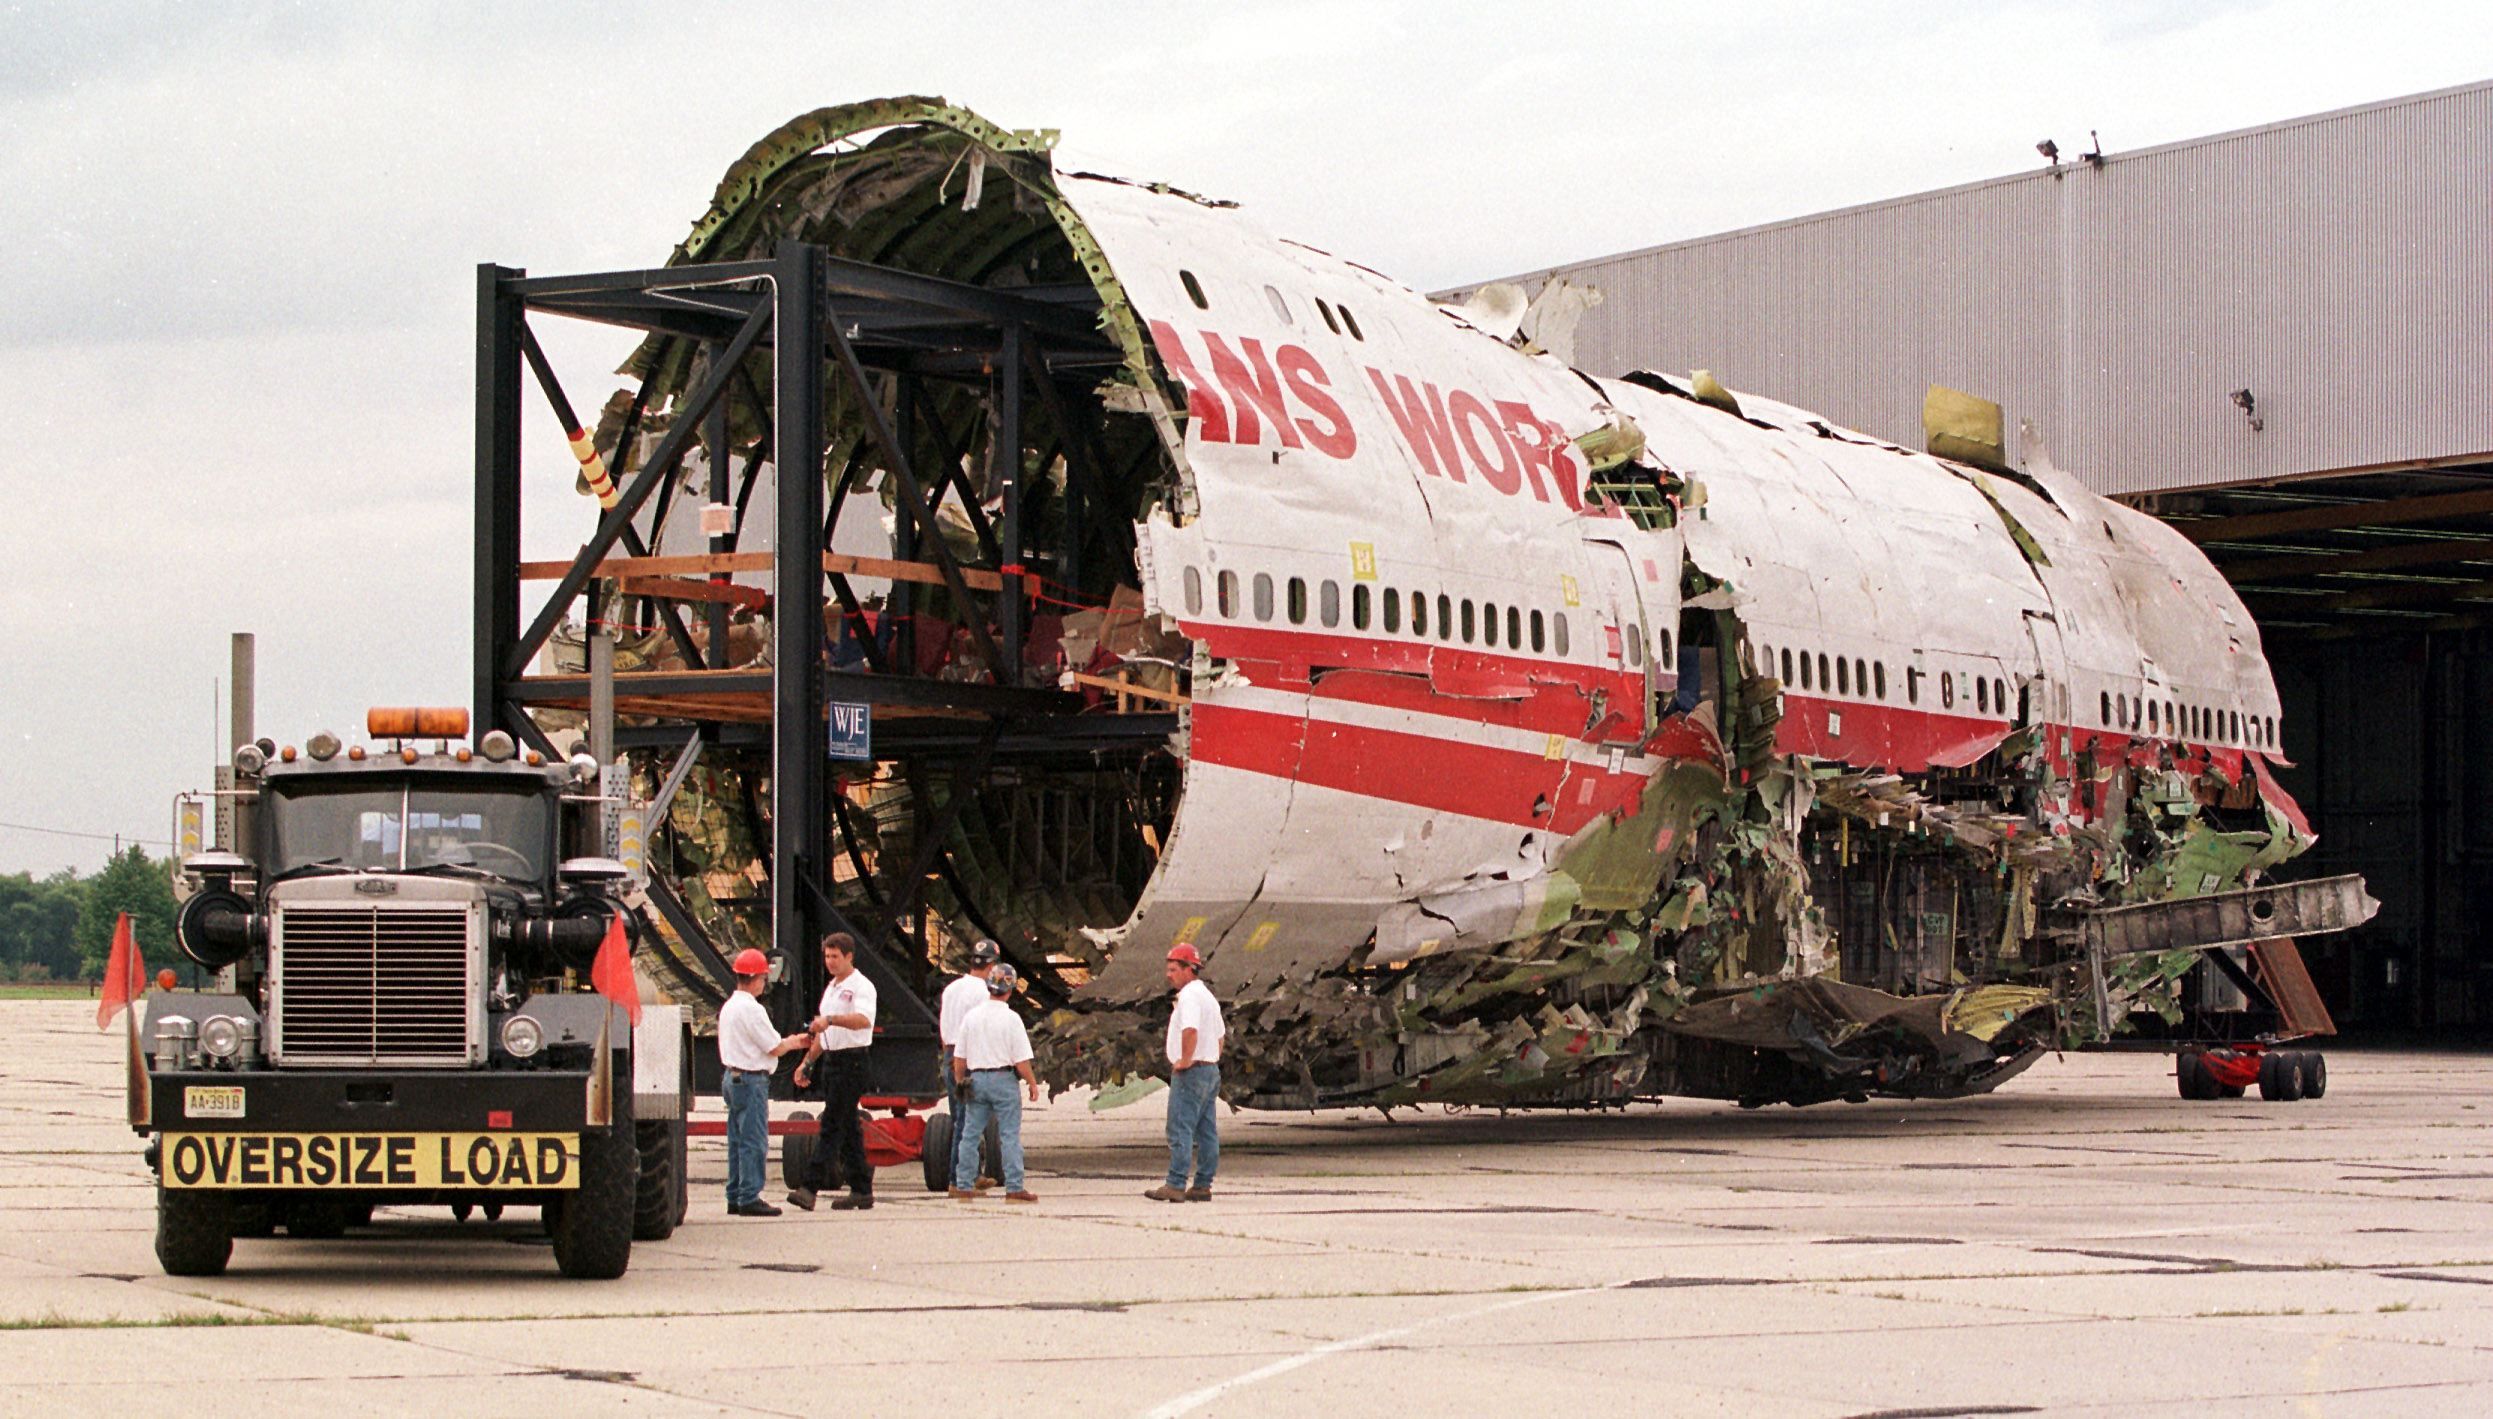 11 Deadliest and Most Devastating Plane Crashes in New York State